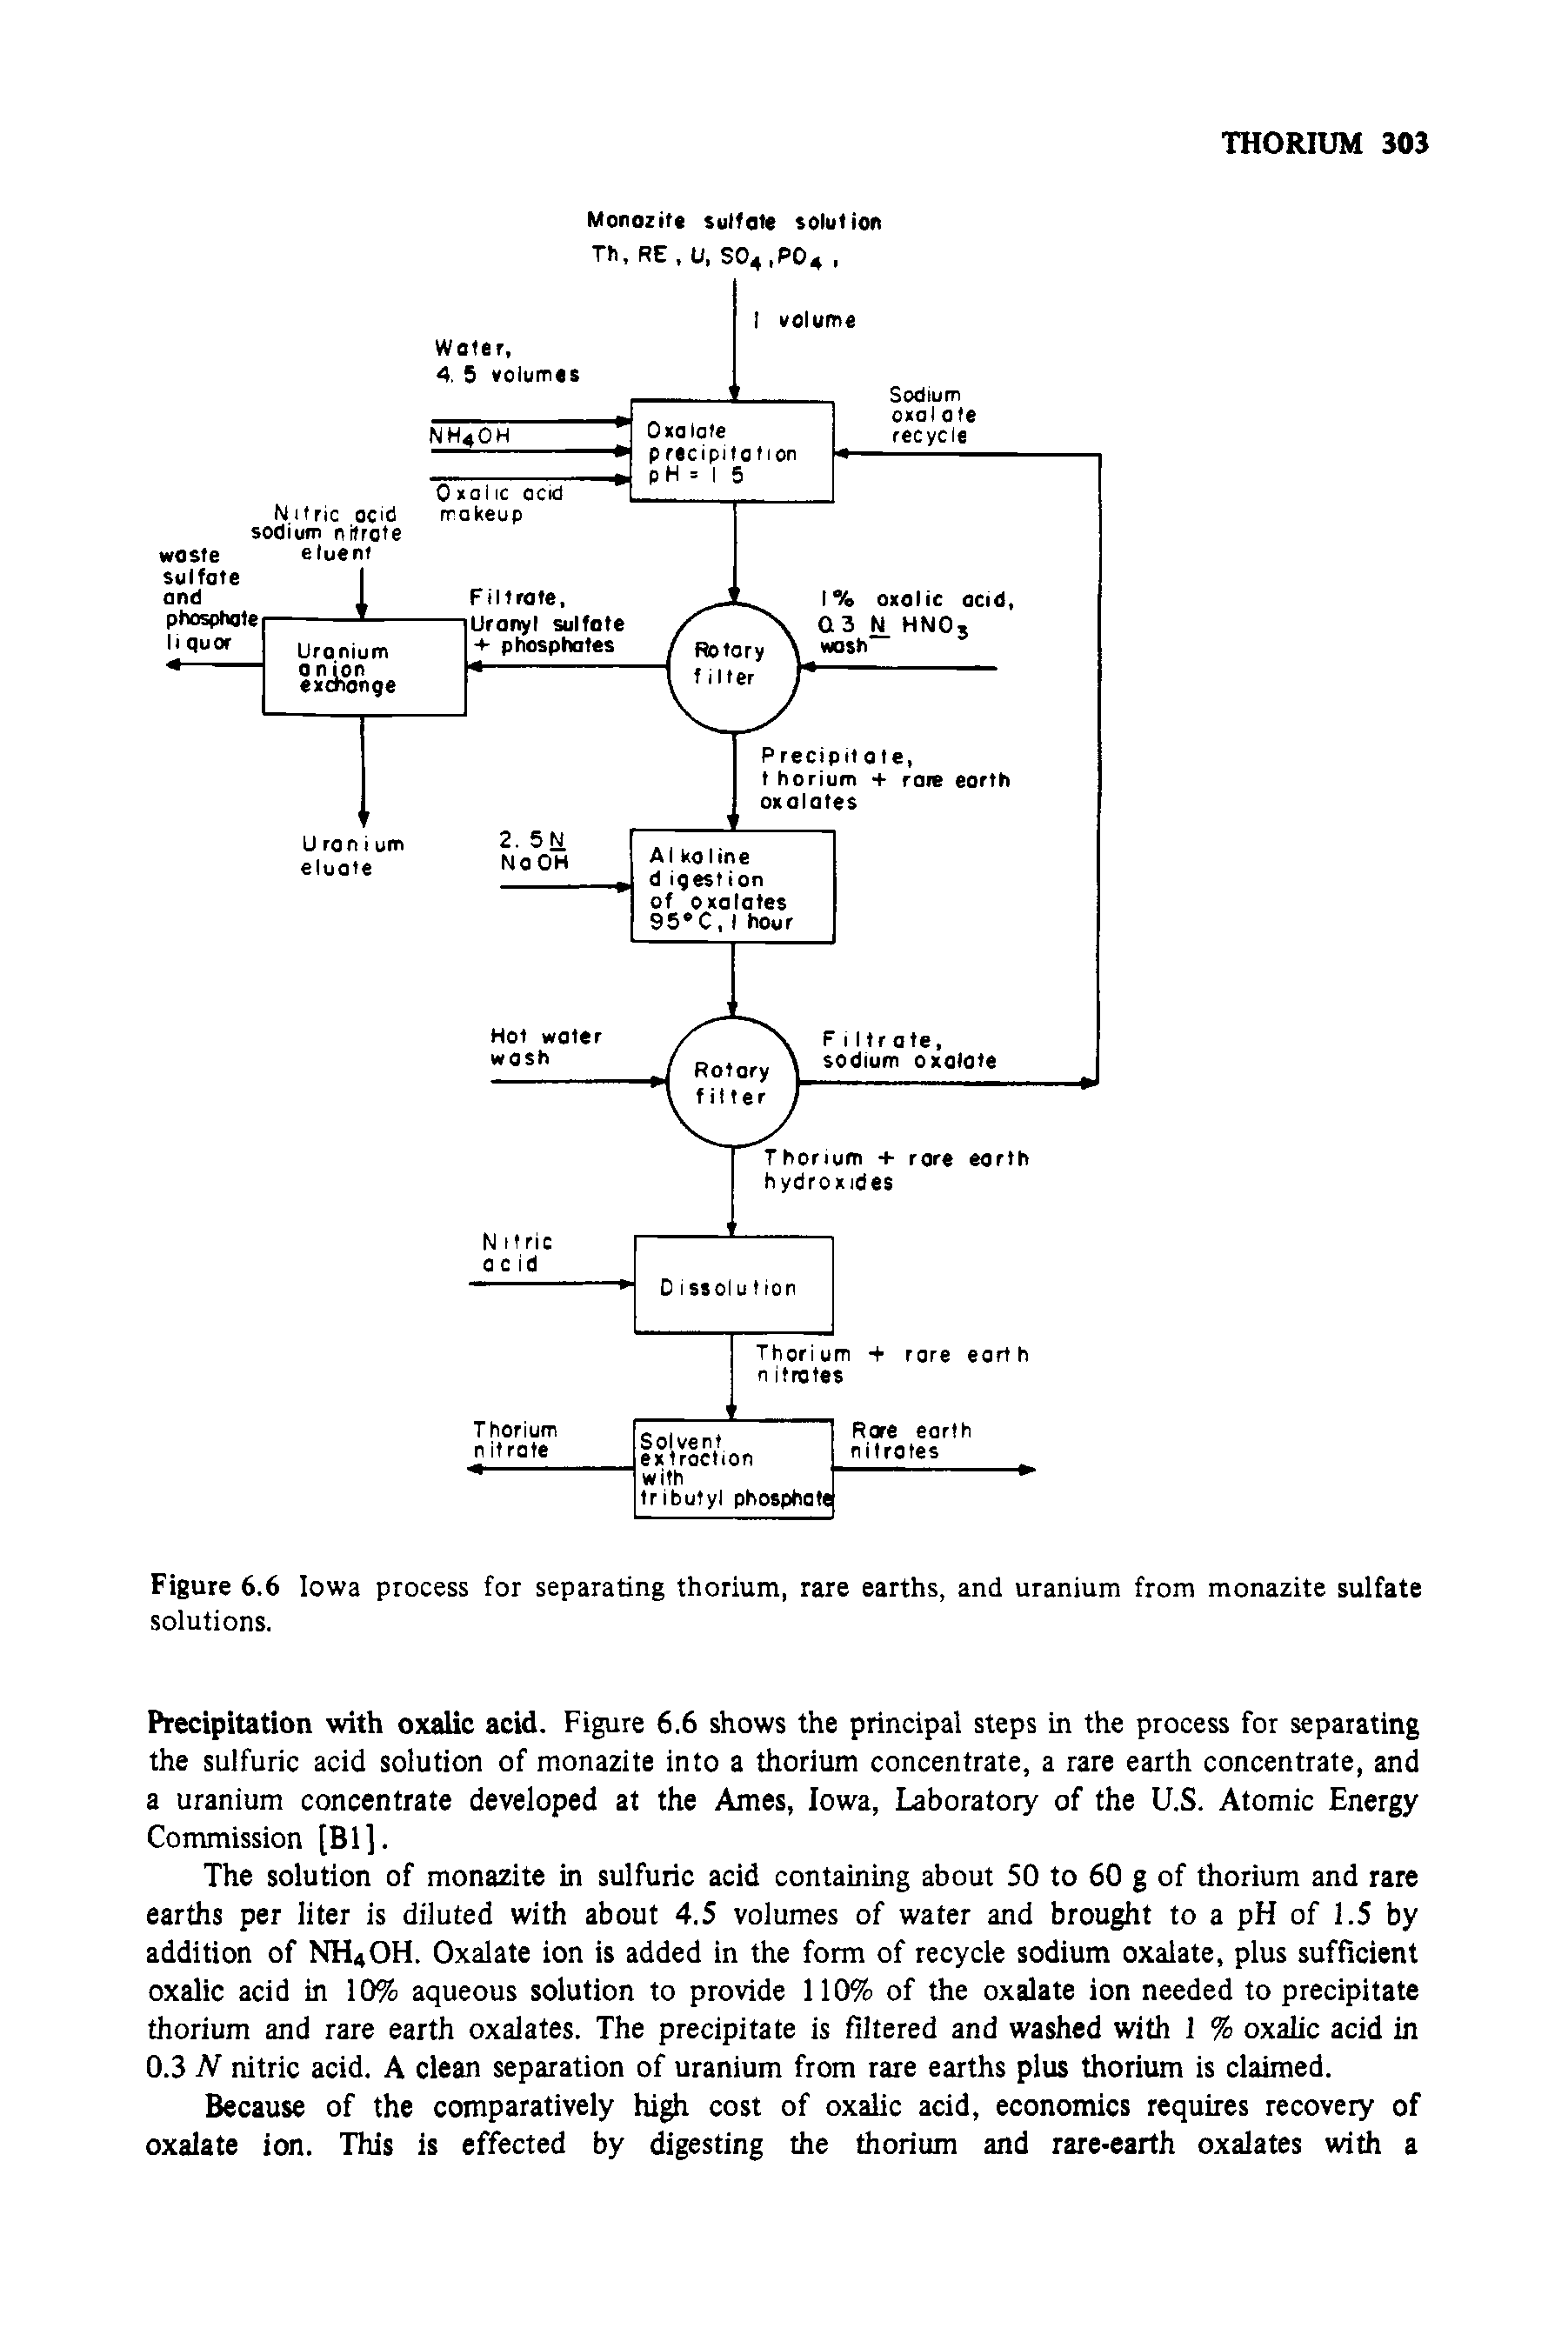 Figure 6.6 Iowa process for separating thorium, rare earths, and uranium from monazite sulfate solutions.